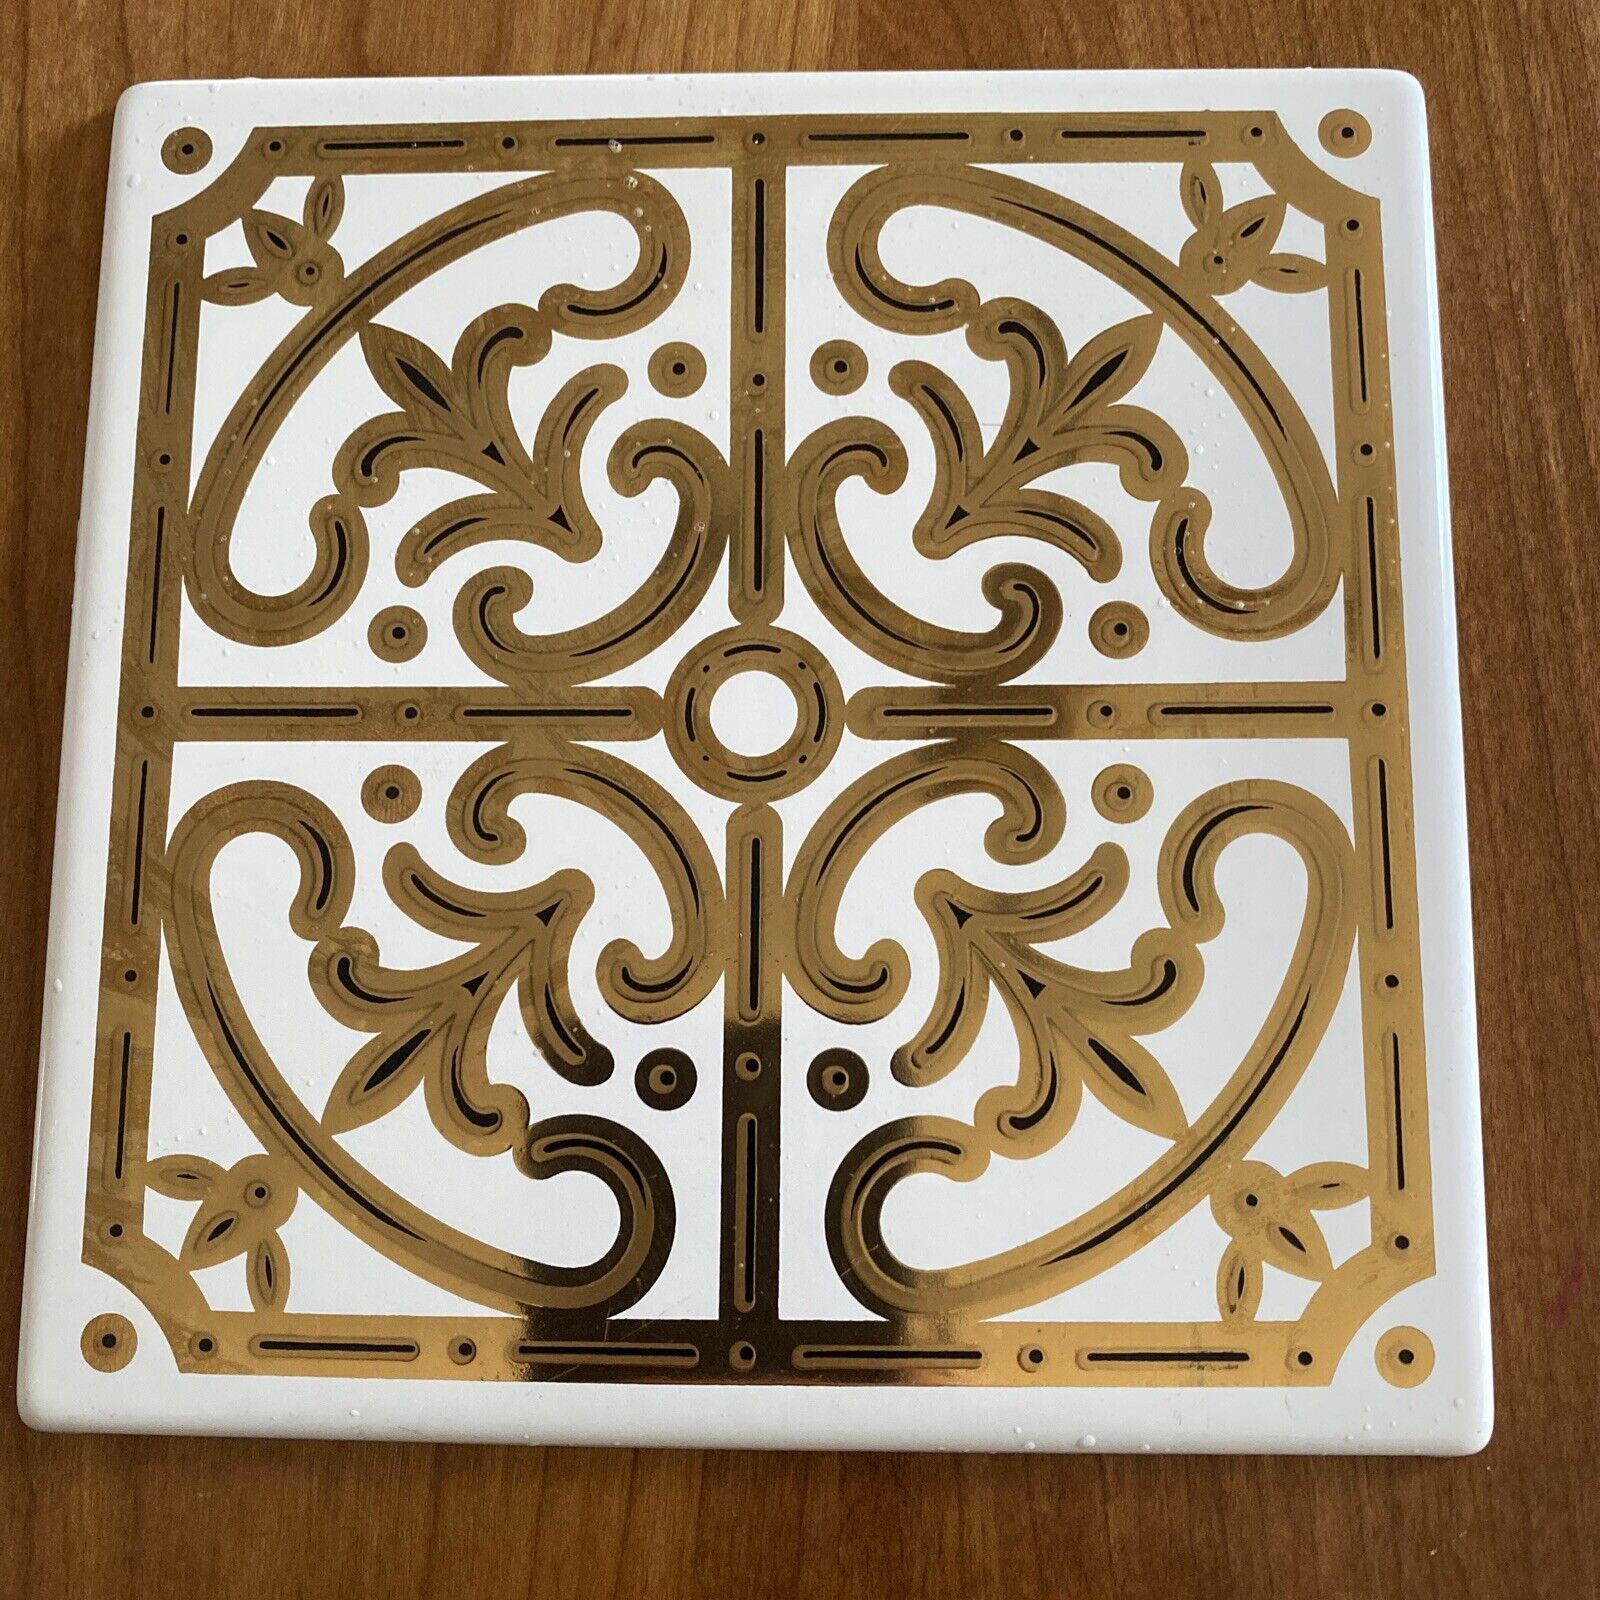 MID-CENTURY GEORGES BRIARD GOLD AND WHITE FANCY ENAMEL METAL TILE TRIVET/COASTER